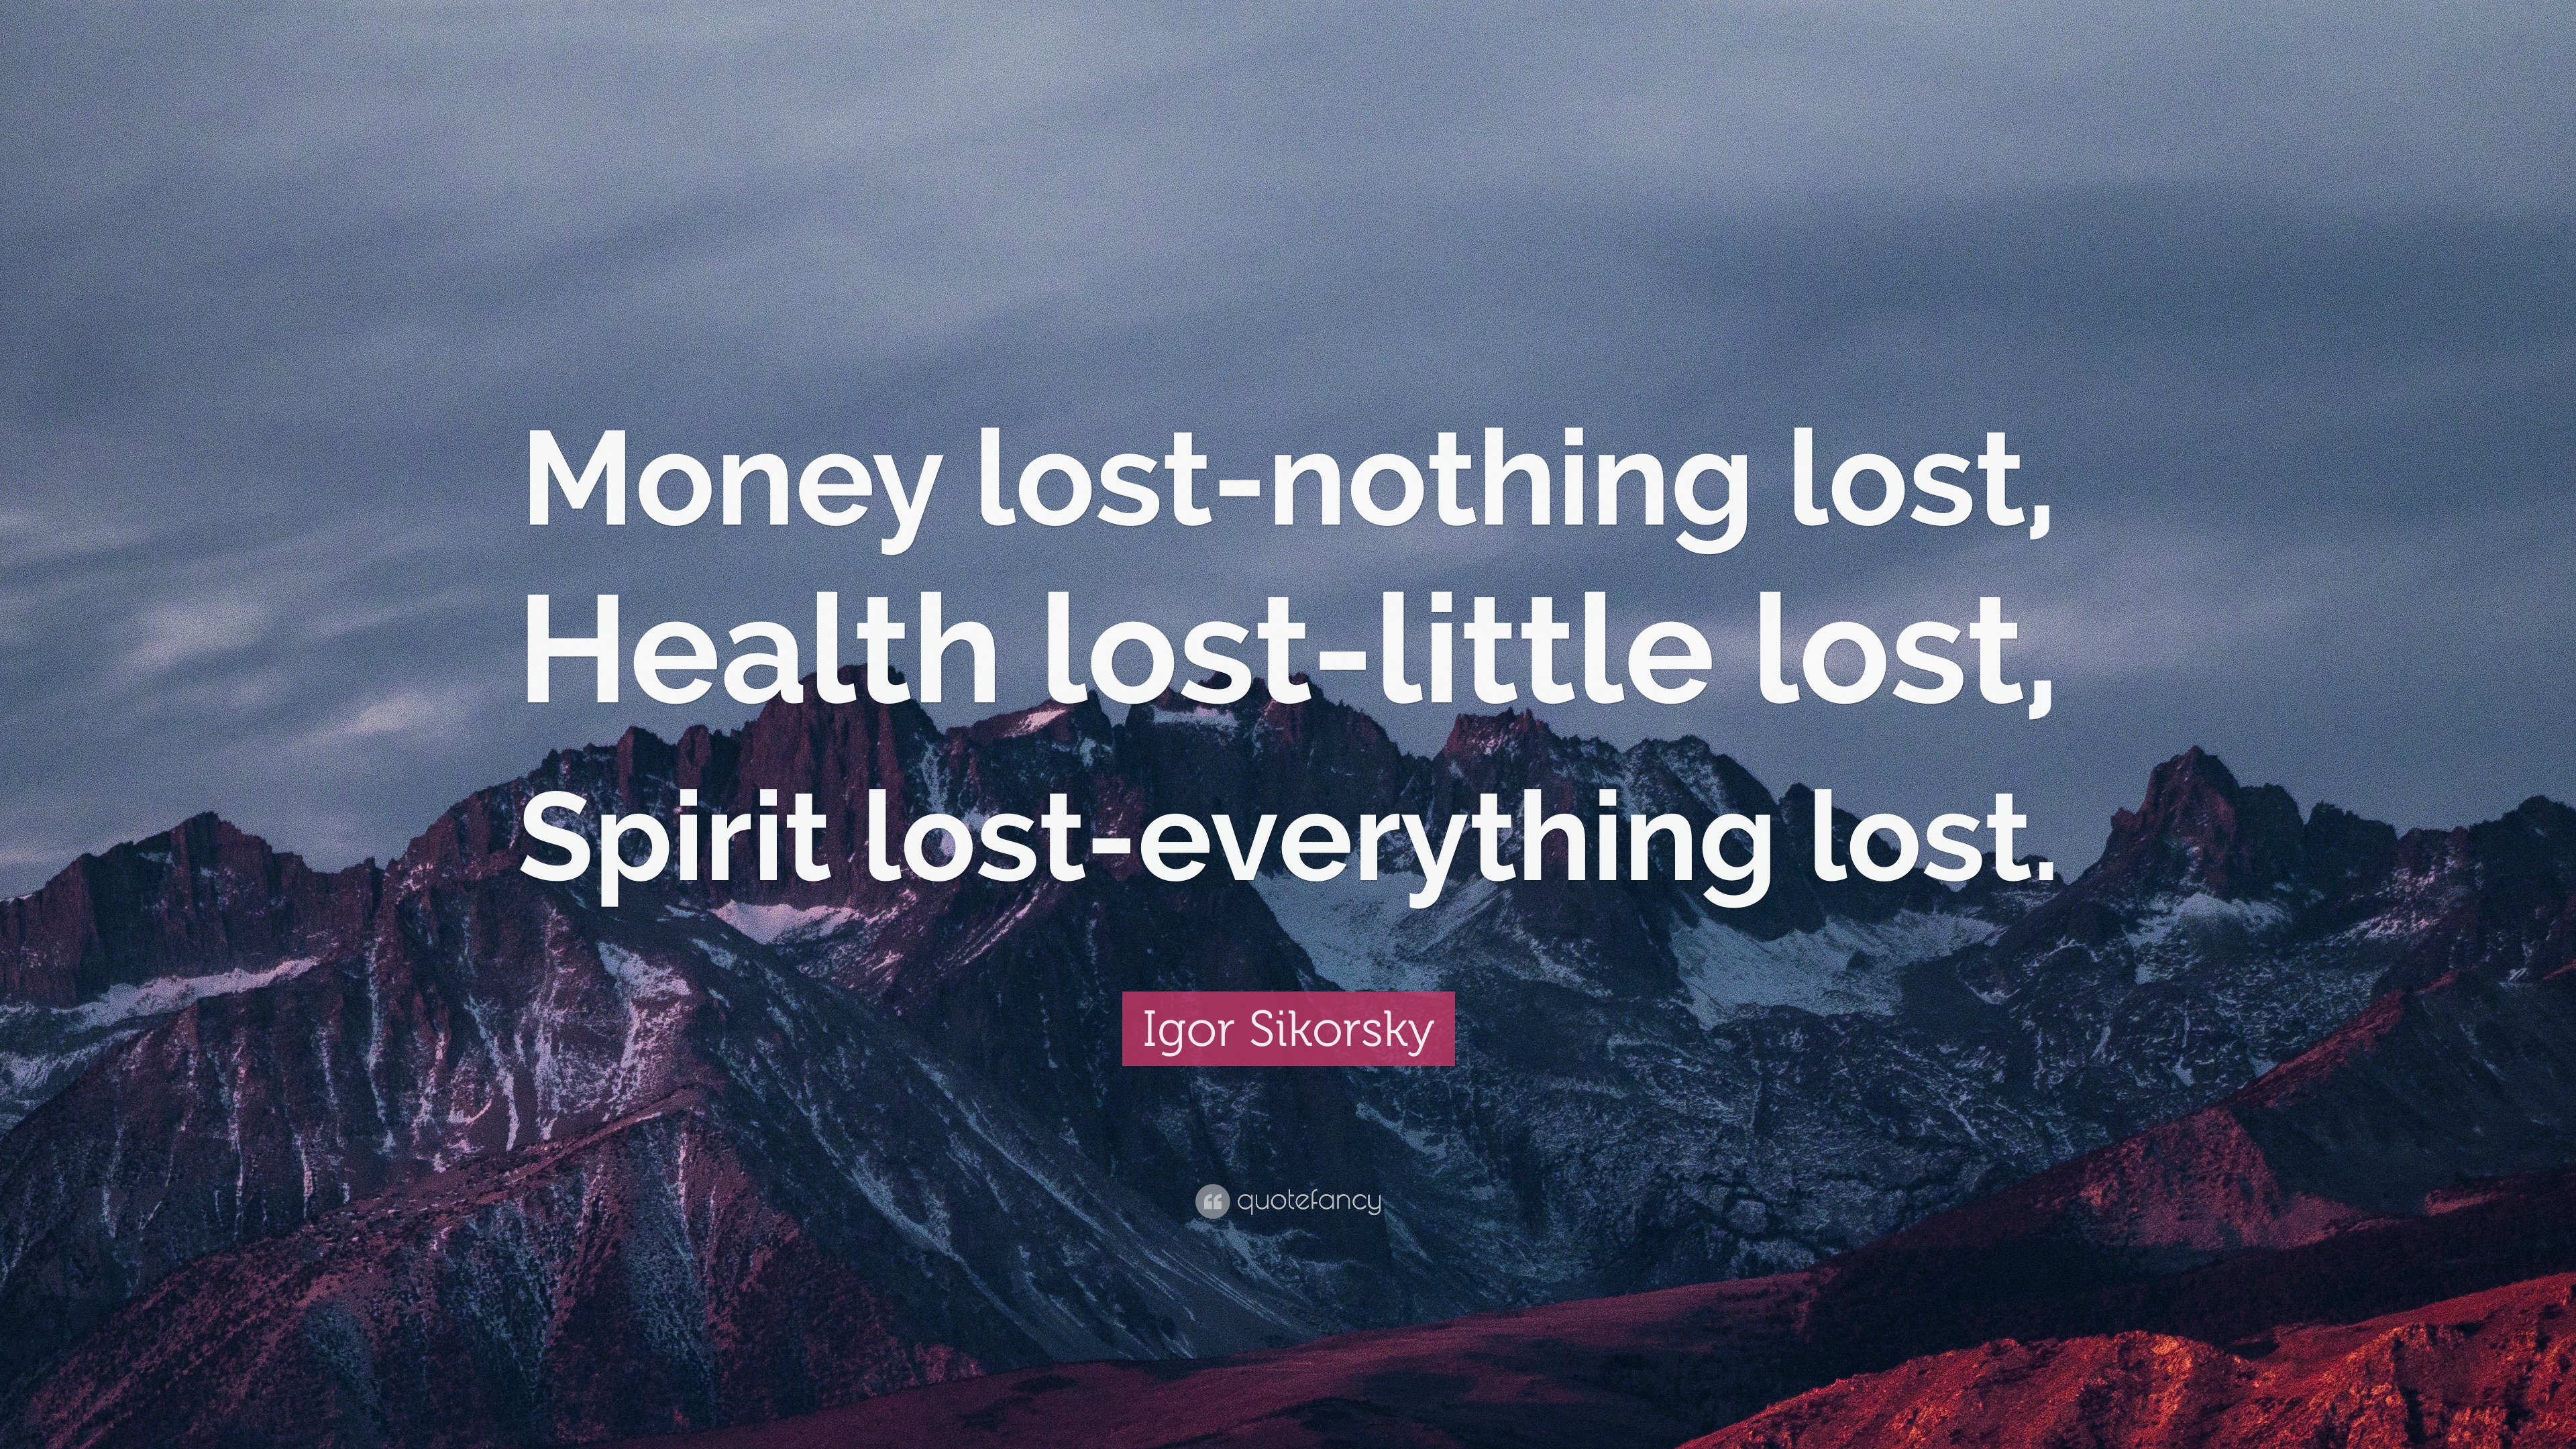 Igor Sikorsky Quote: "Money lost-nothing lost, Health lost-little lost, Spirit lost-everything ...